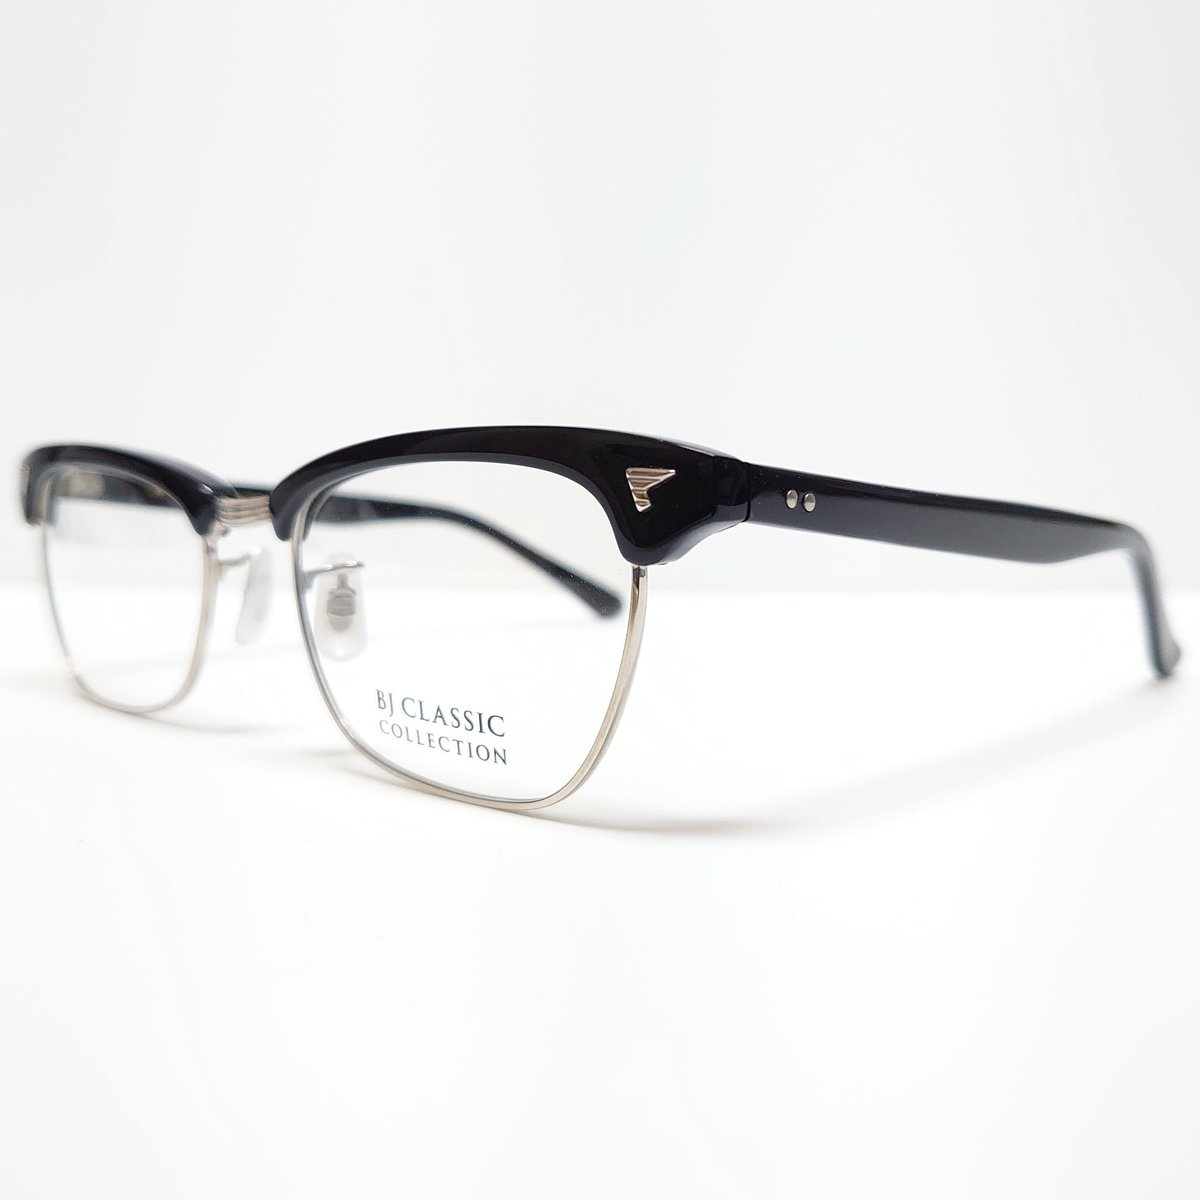 BJ CLASSIC COLLECTION S-801 C-2 | OPTICAL TAILO